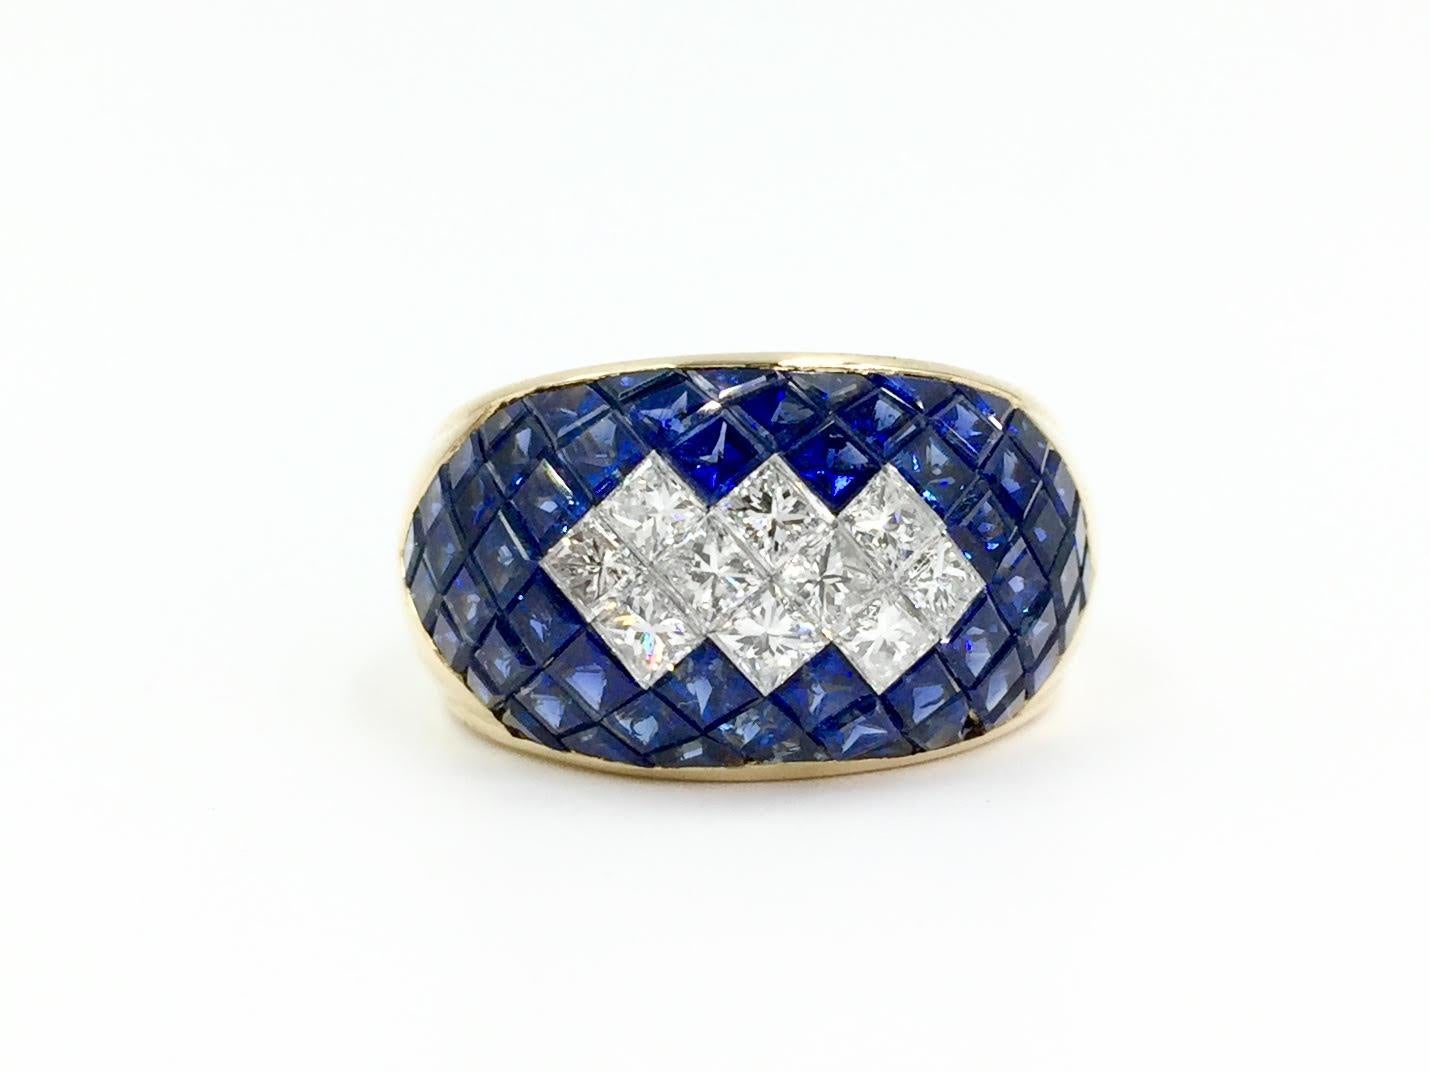 A sleek wide 18 karat slightly domed illusion-set ring featuring 7.93 carats of gorgeous quality sapphires and 1 carat of bright white diamonds. Diamond quality is approximately F color, VVS2 clarity. High quality blue sapphires are semi-transparent